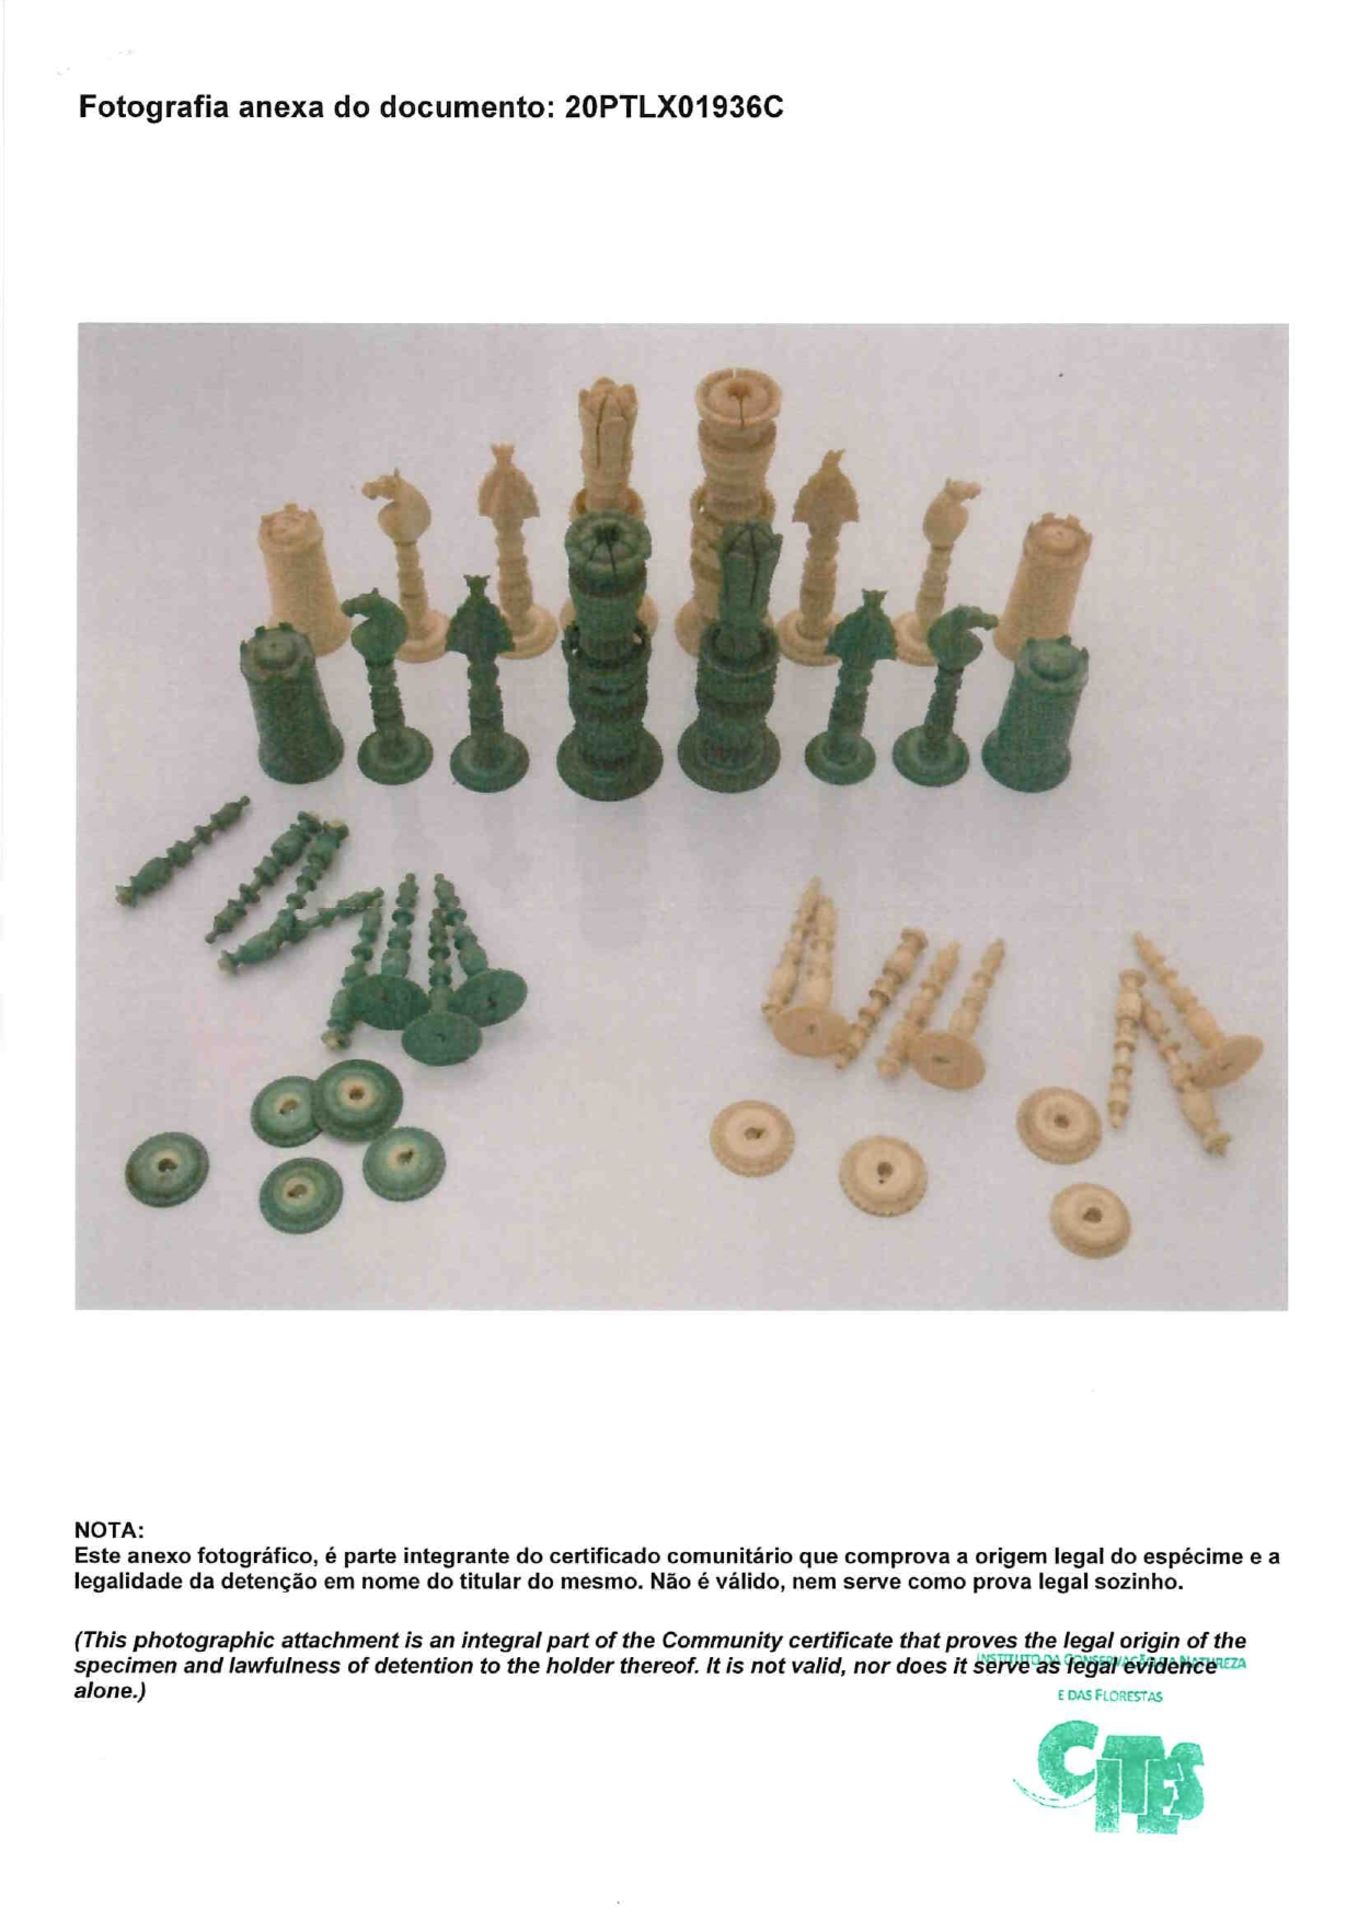 Chess pieces - Image 7 of 7